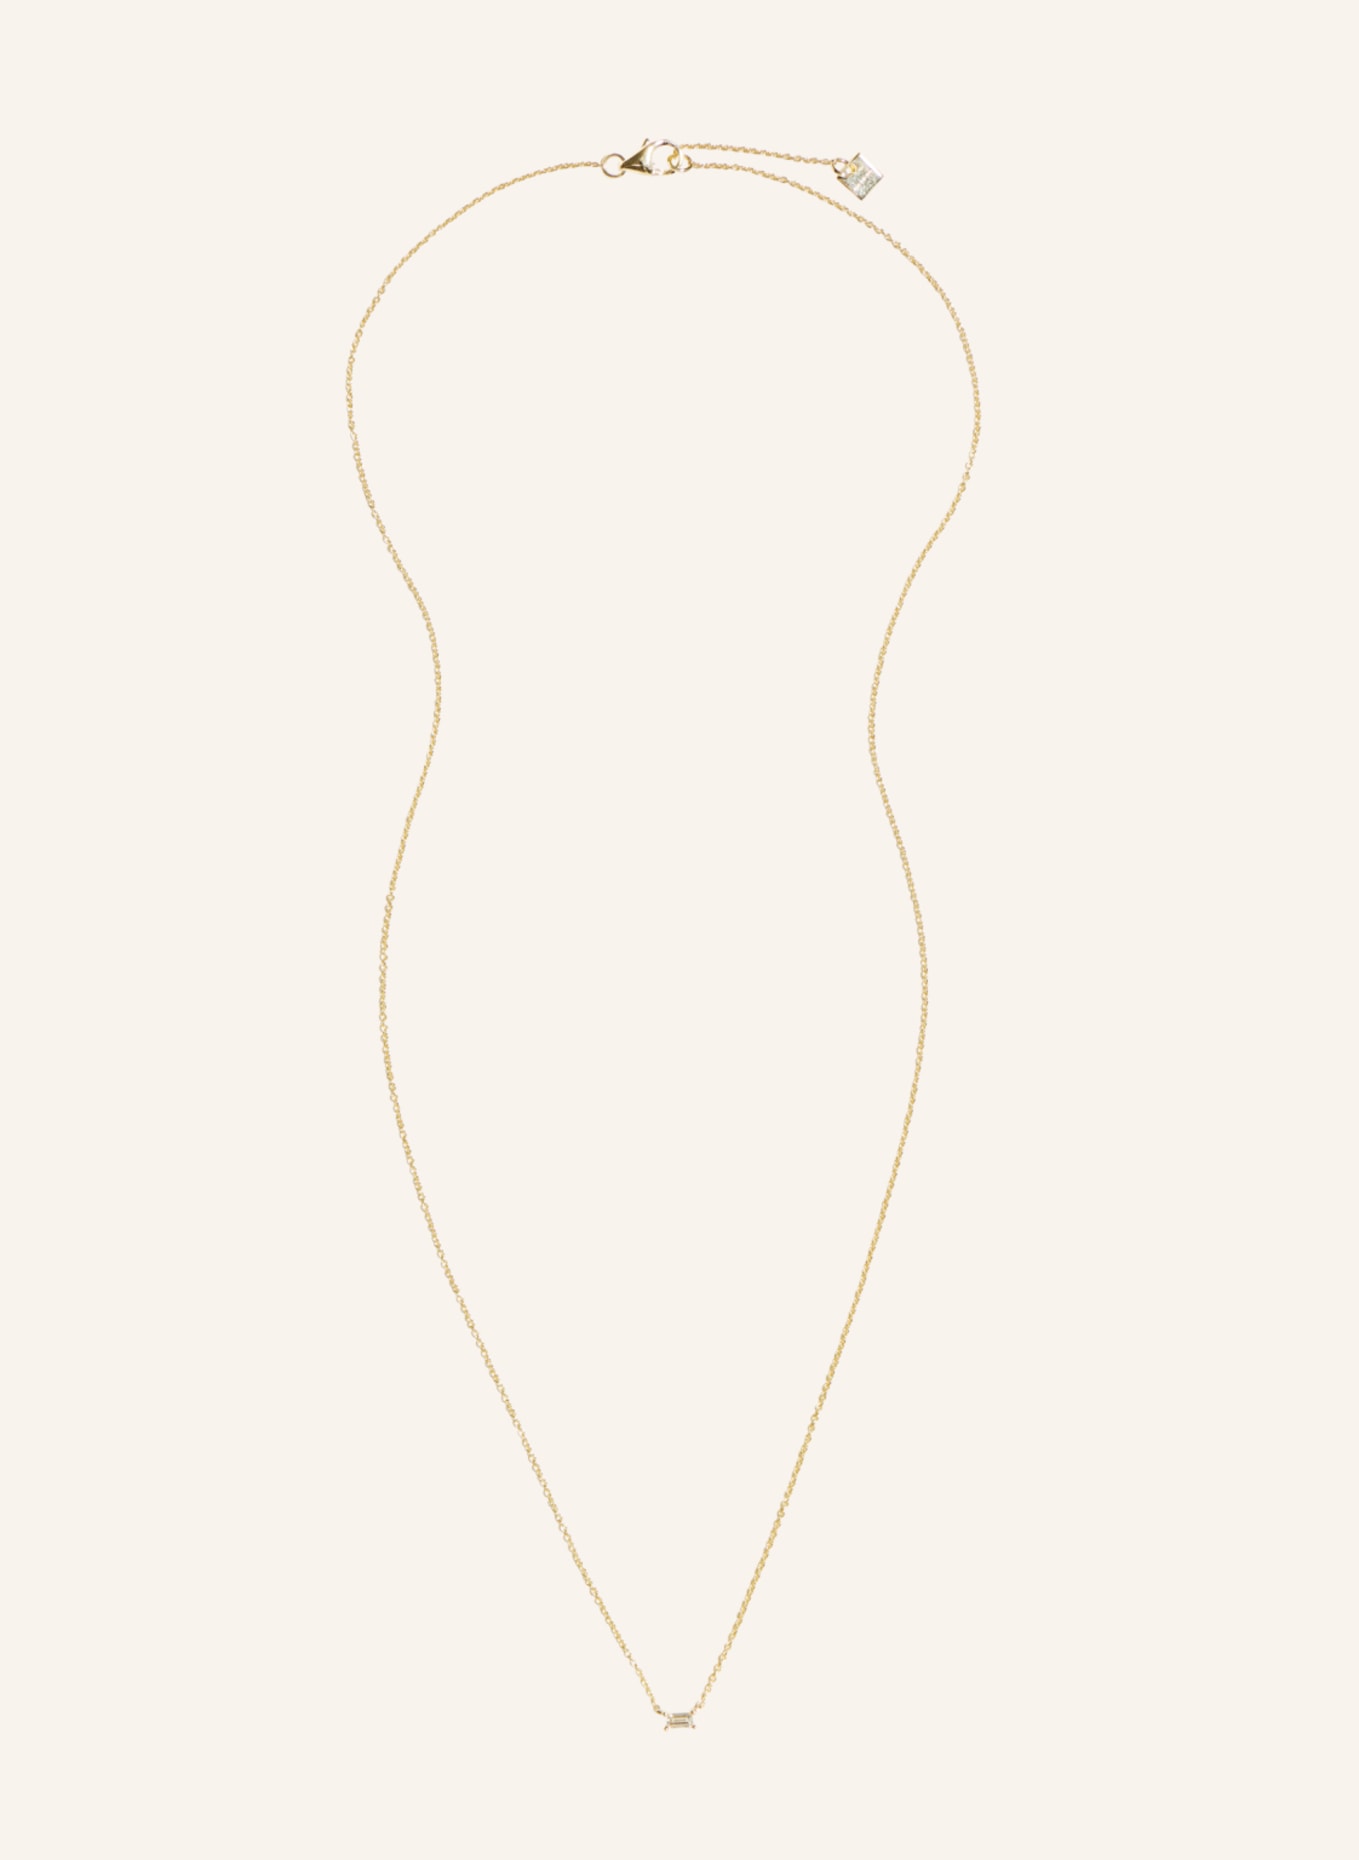 JUULS & KARATS Kette NECKLACE 002 by GLAMBOU, Farbe: GOLD (Bild 1)